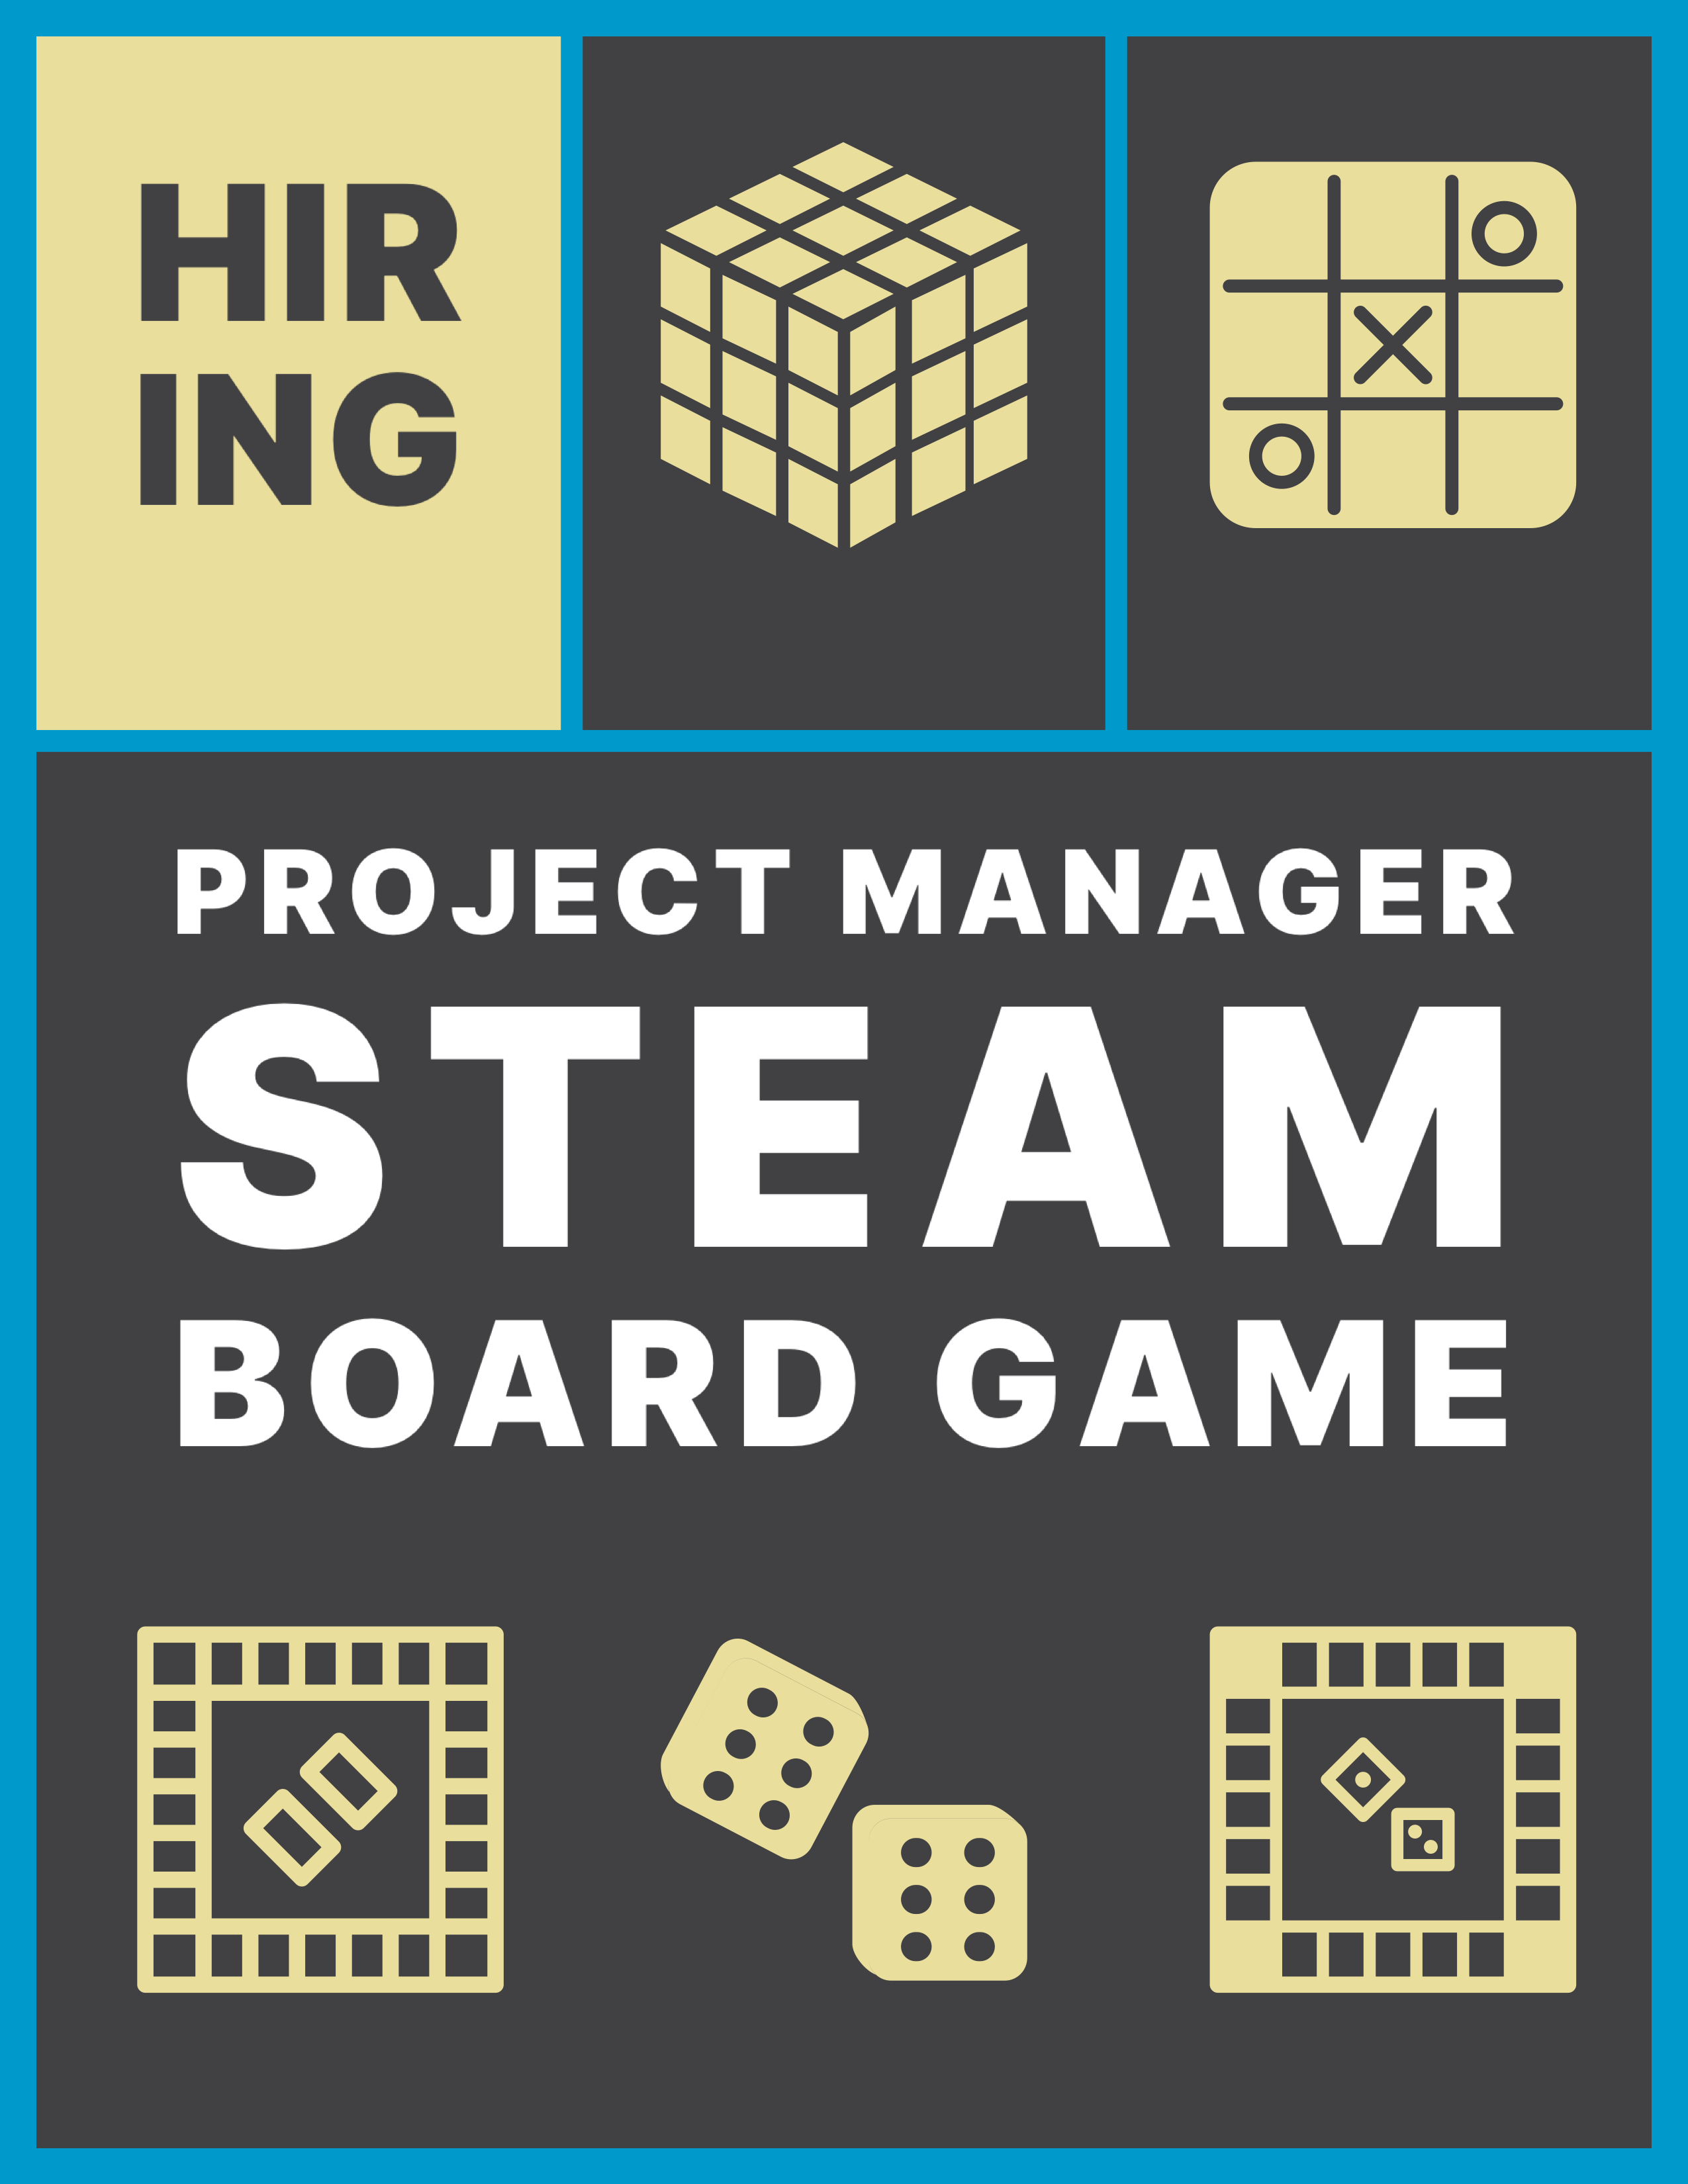 TEKEDU Project Manager for STEAM board game